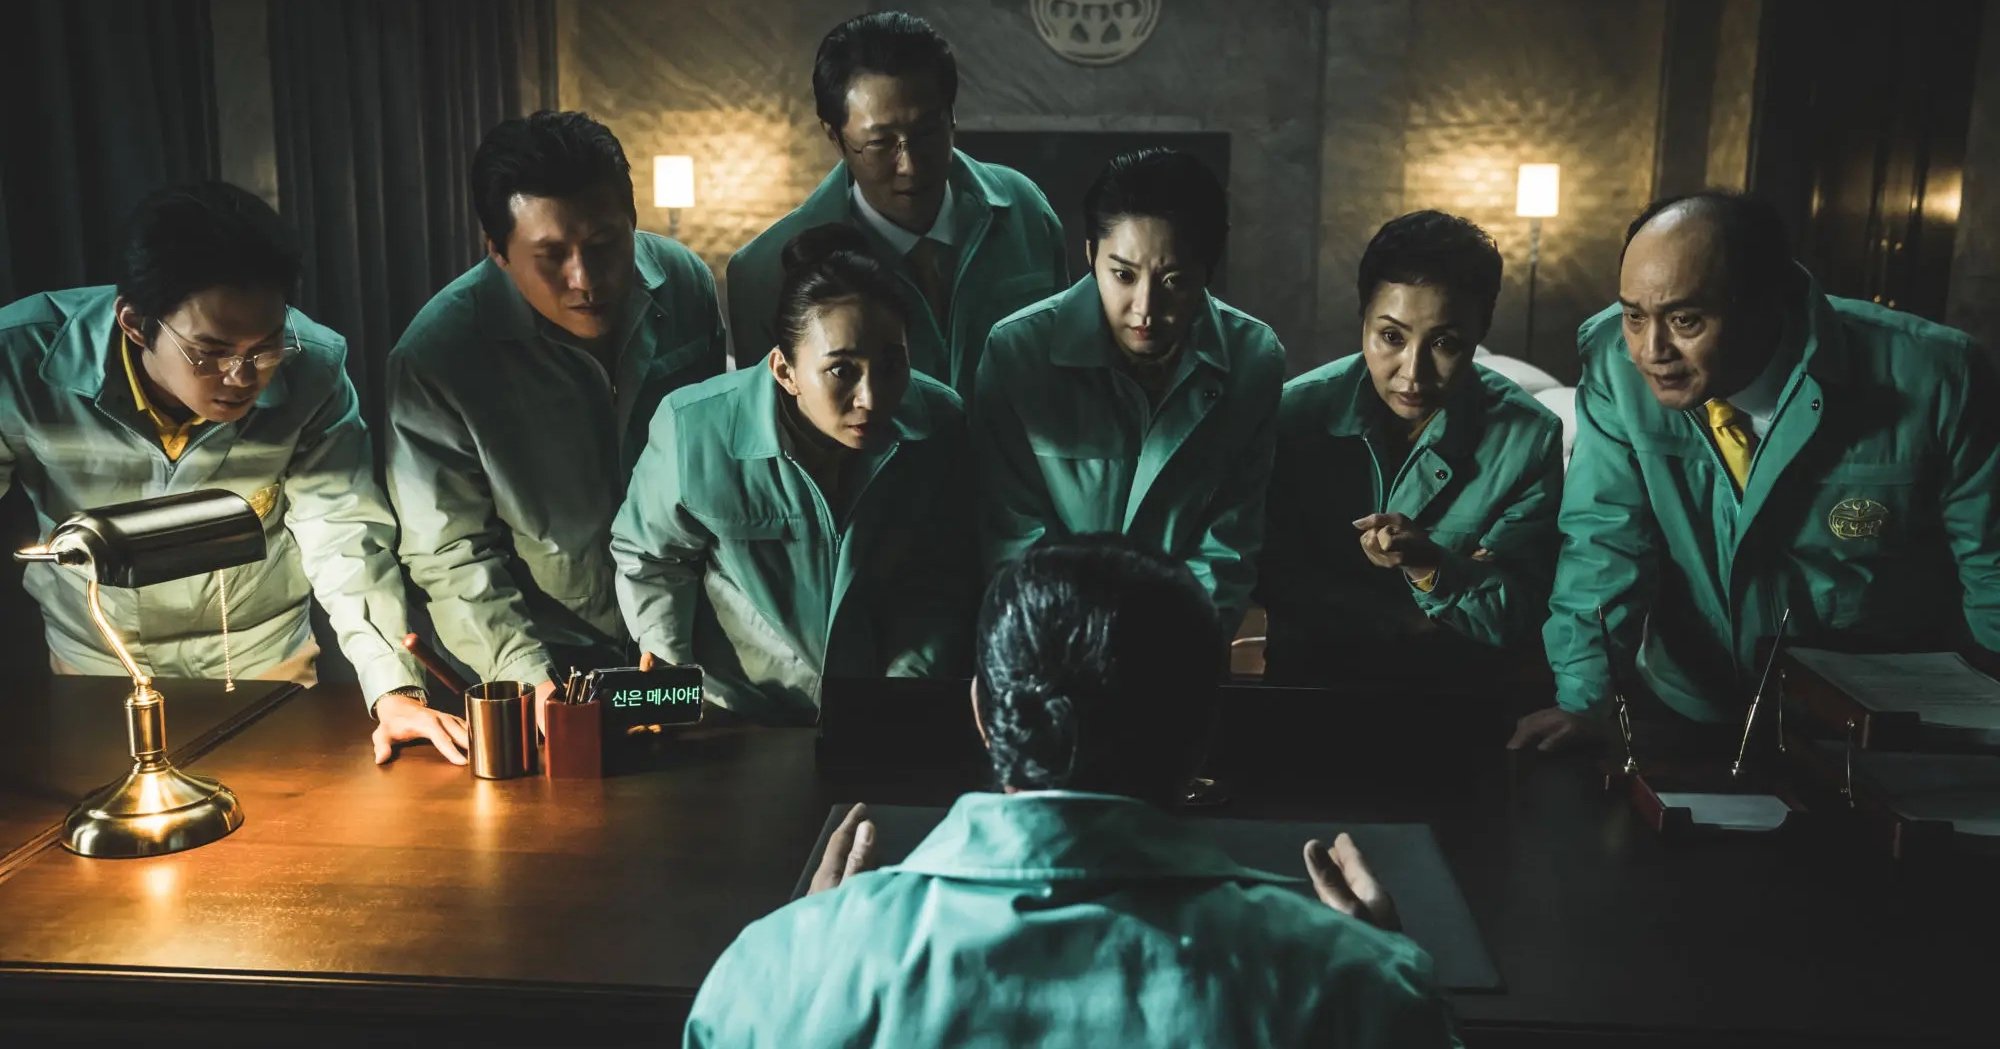 Cult followers in 'Hellbound' for Netflix wearing mint green jackets huddling over desk.